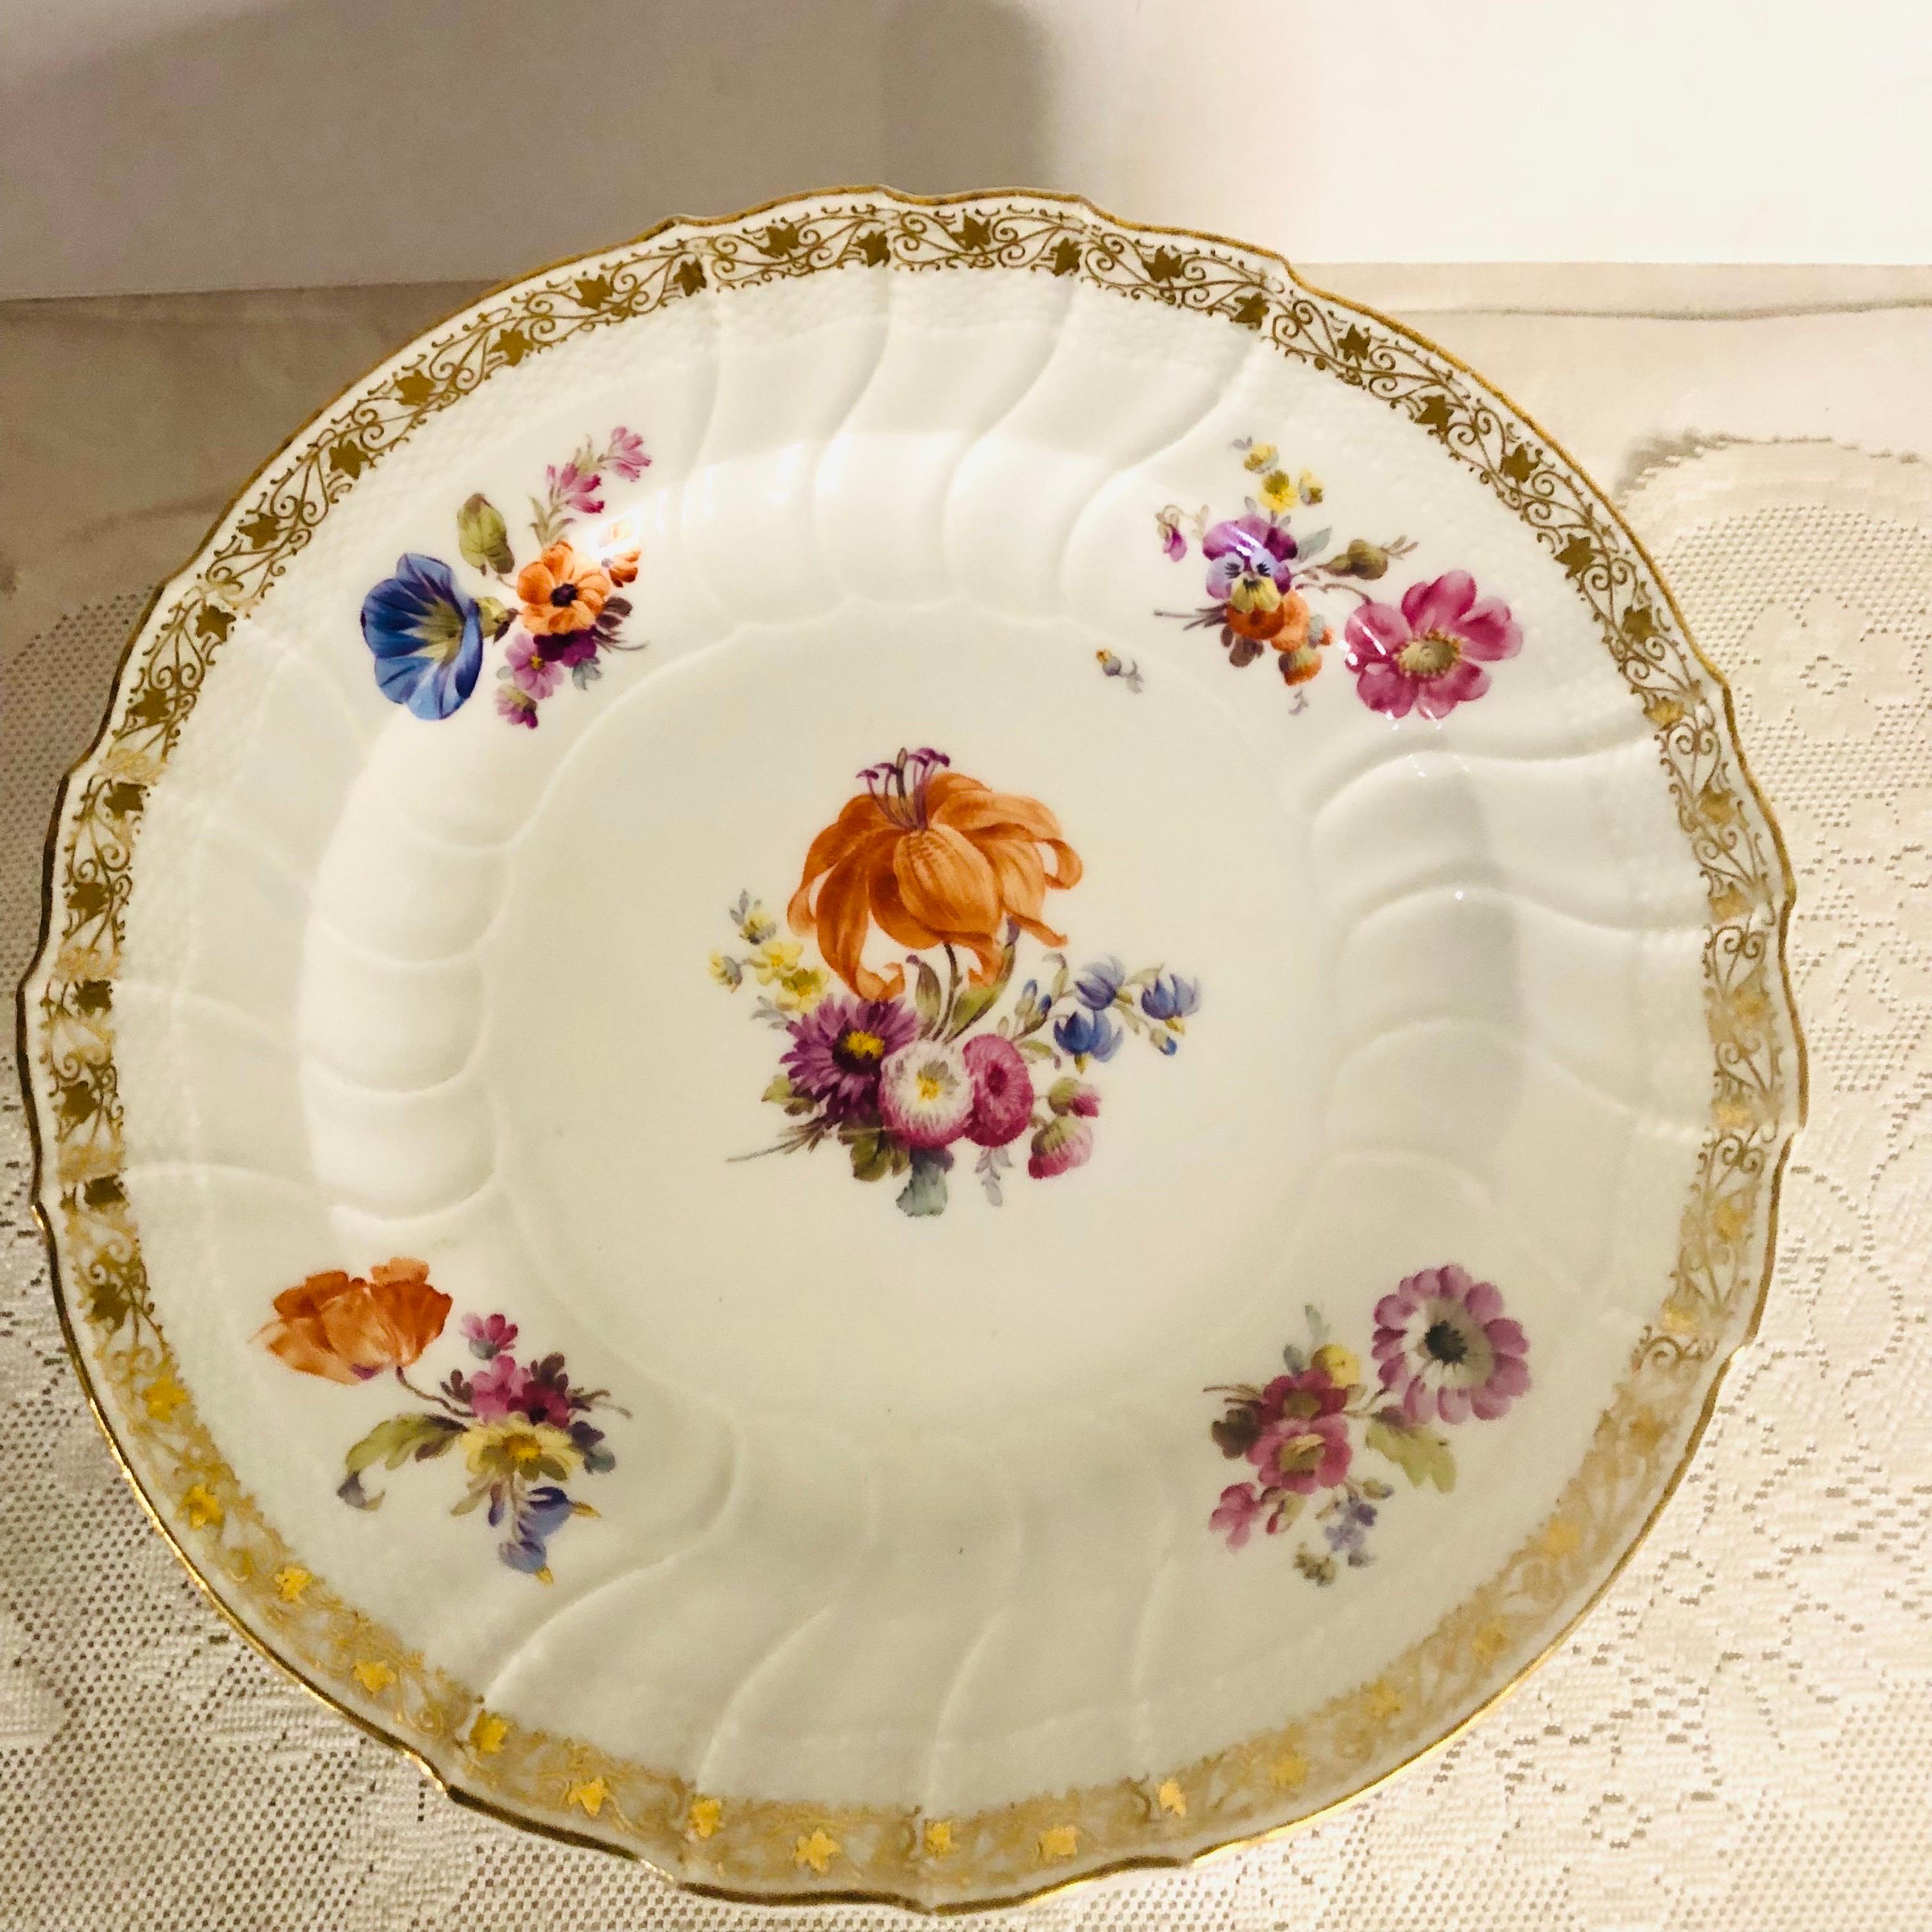 12 KPM Dinner Plates, Each Hand-Painted with a Different Central Flower Bouquet For Sale 11